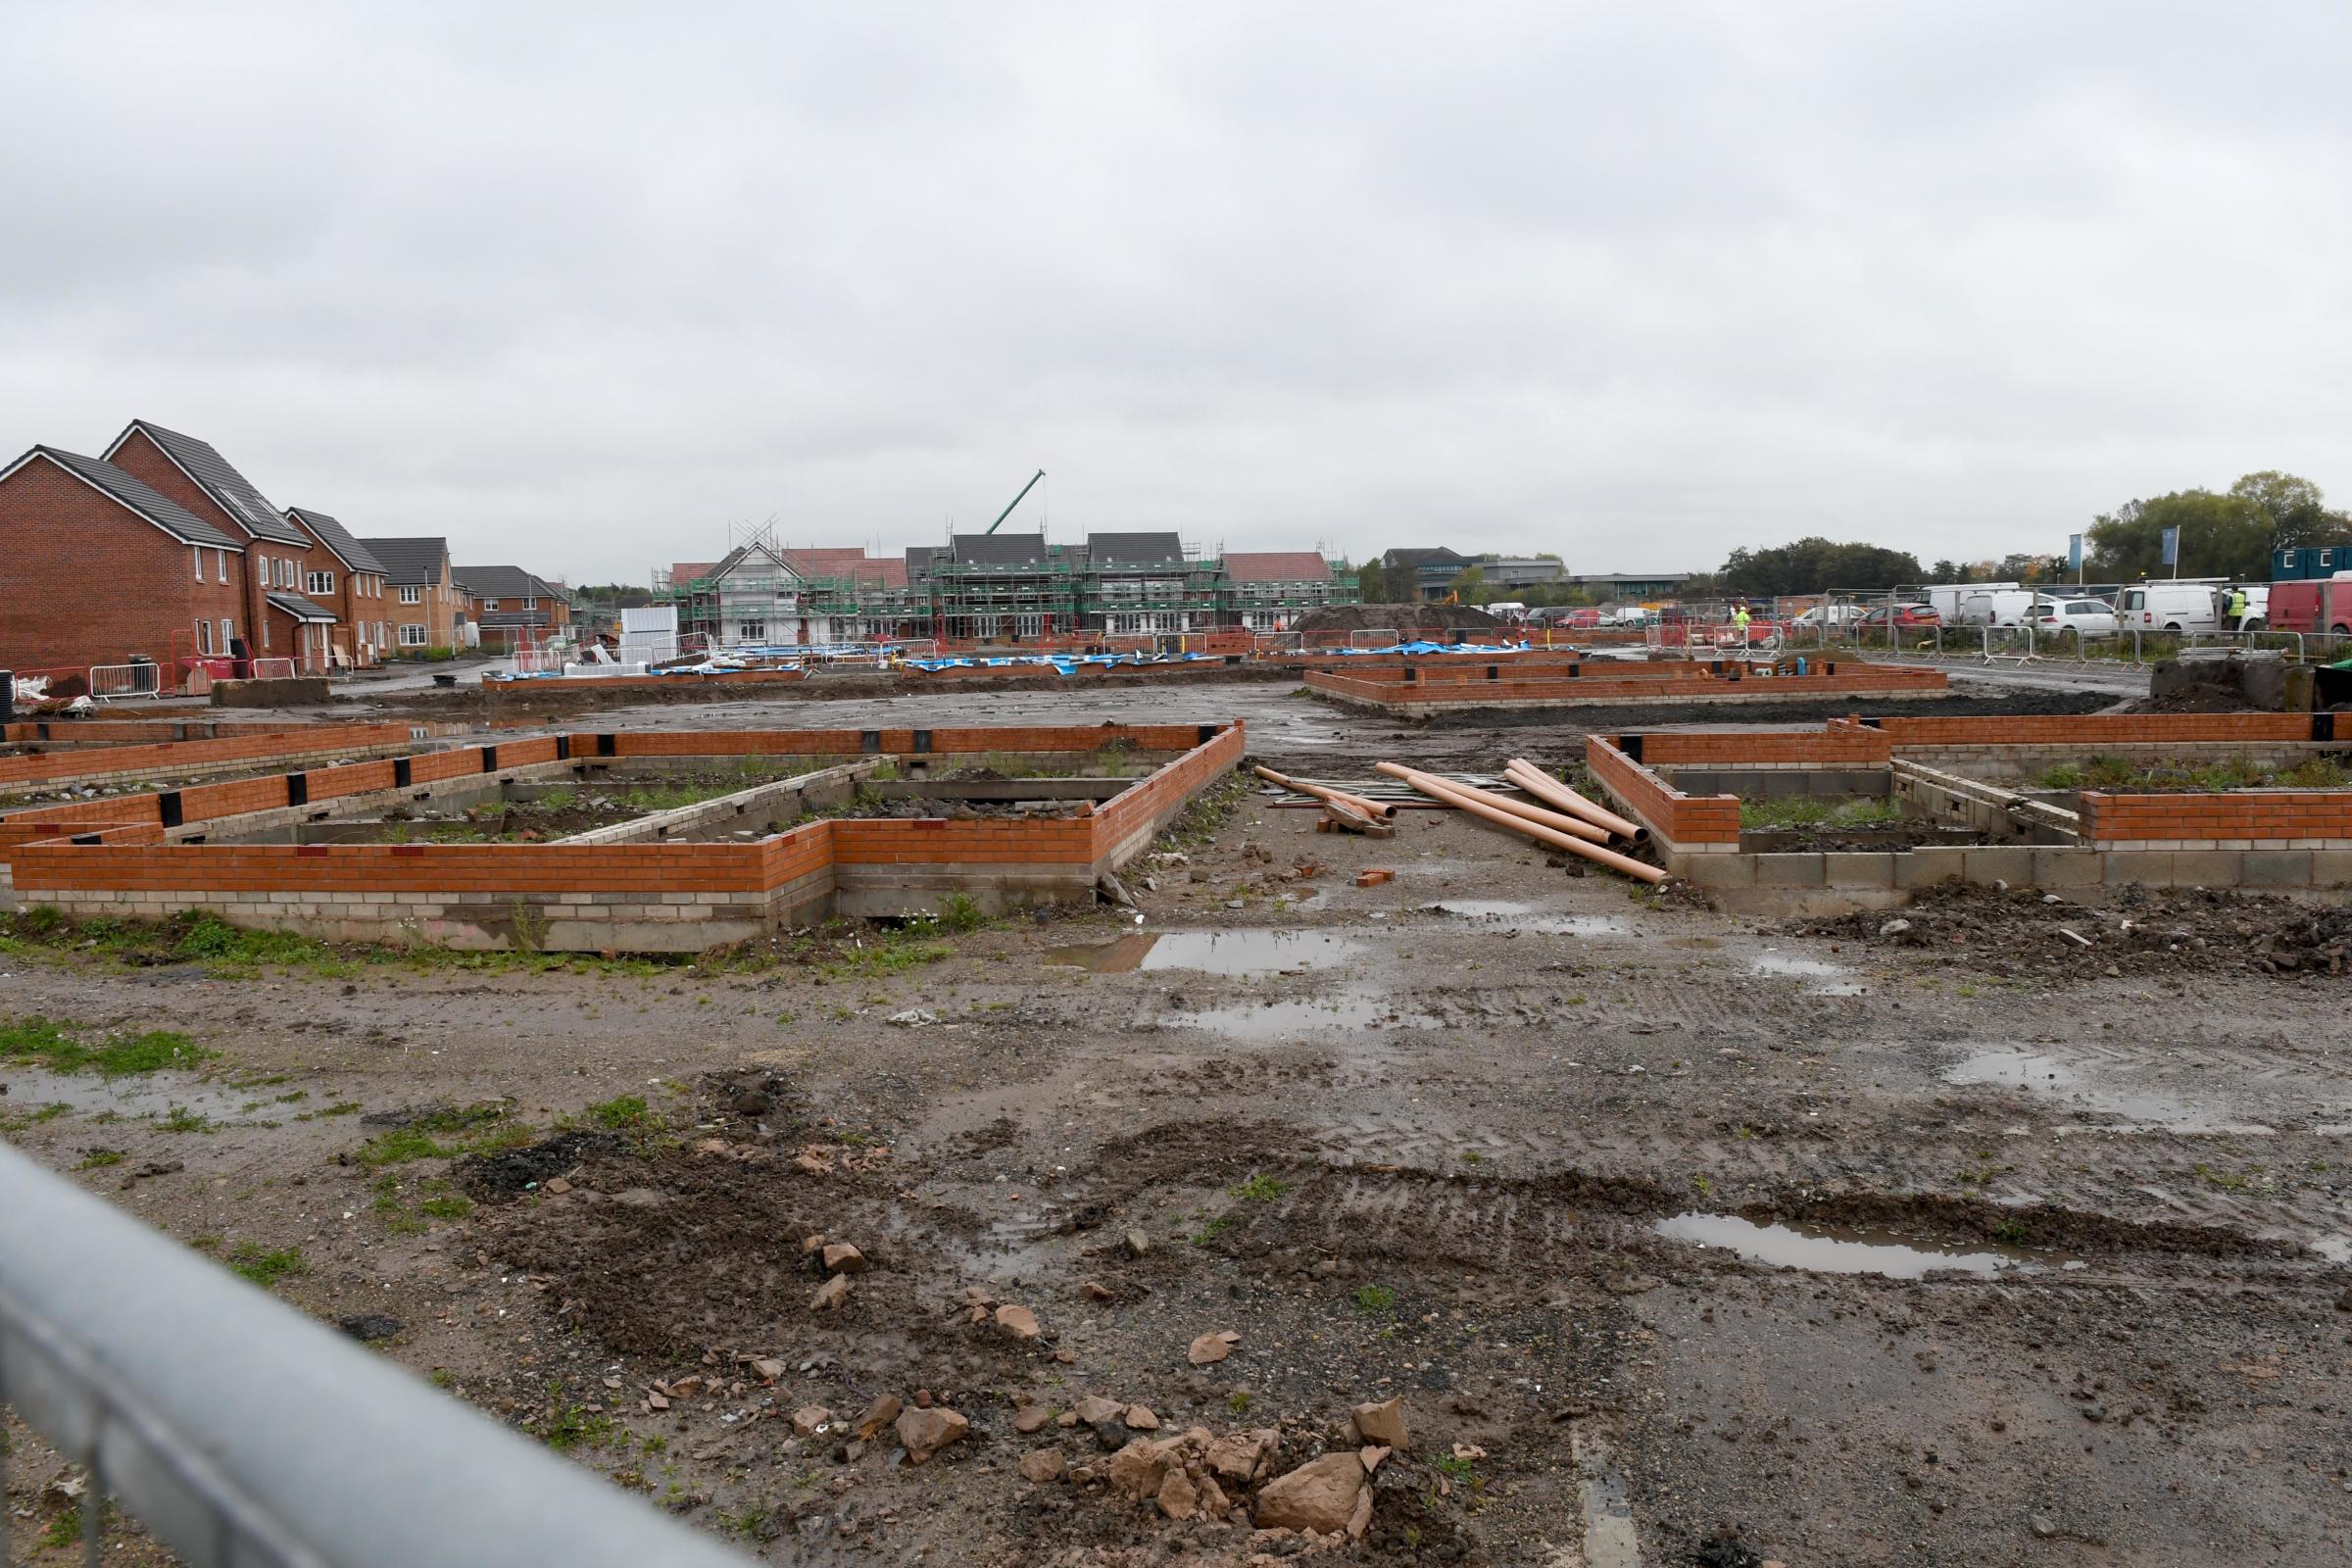 The Rivers Edge housing development near the town centre is well underway